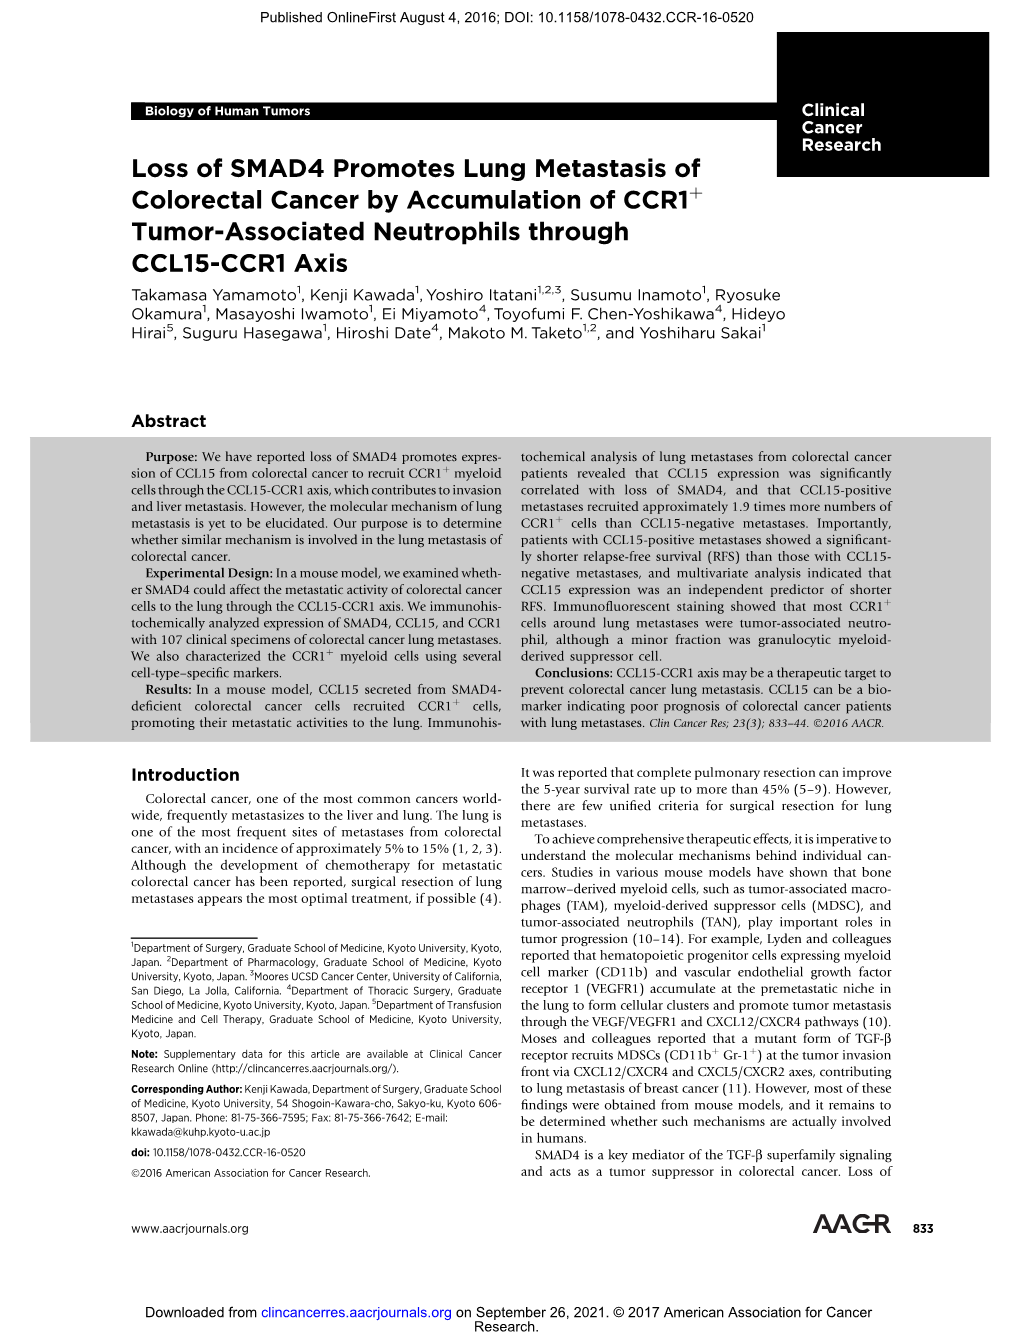 Loss of SMAD4 Promotes Lung Metastasis of Colorectal Cancer by Accumulation of CCR1 Tumor-Associated Neutrophils Through CCL15-C